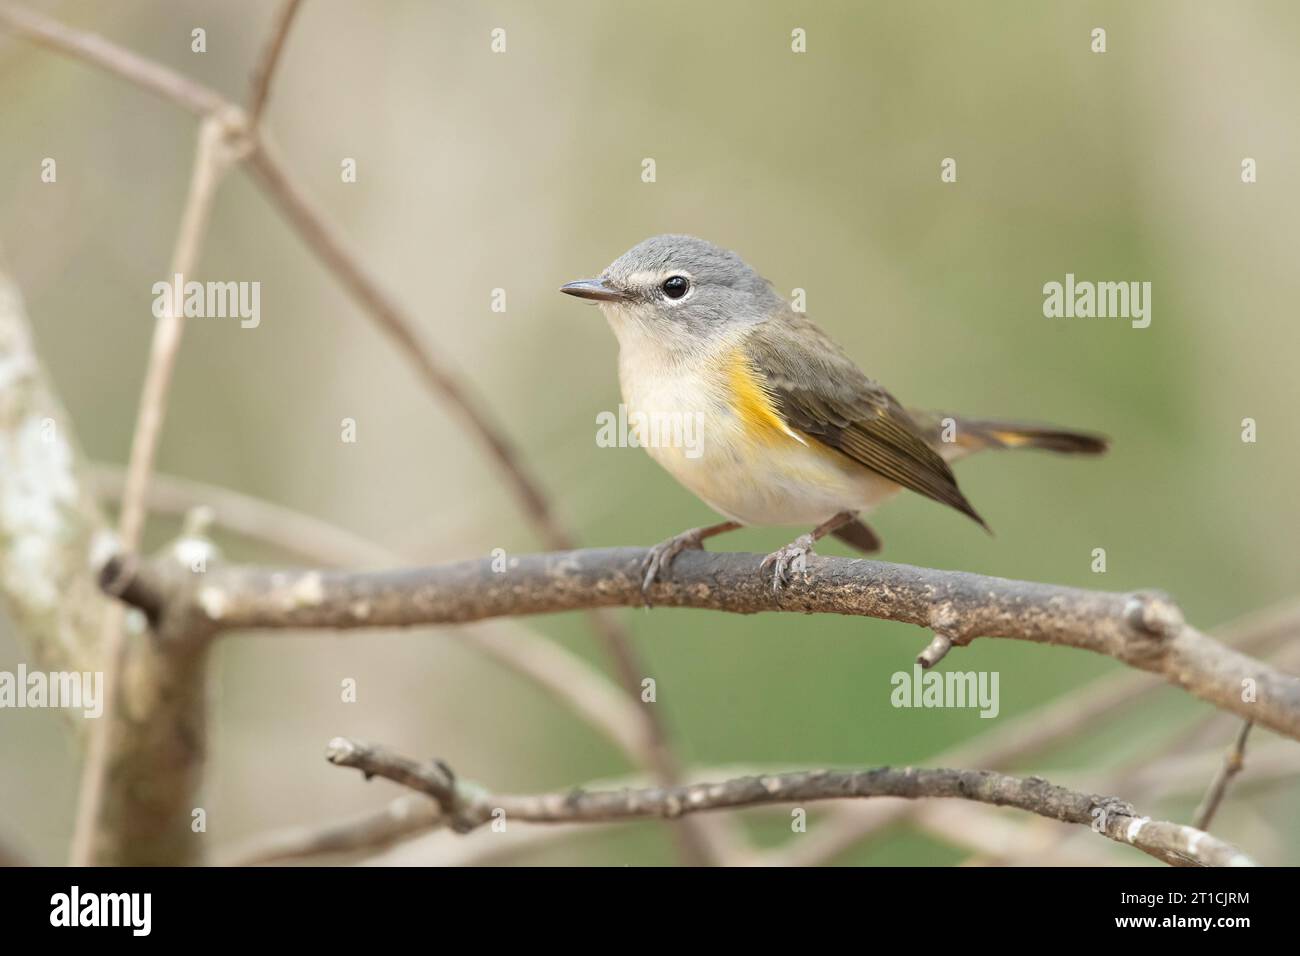 American redstart (Setophaga ruticilla) is a New World warbler. It is unrelated to the Old World Stock Photo